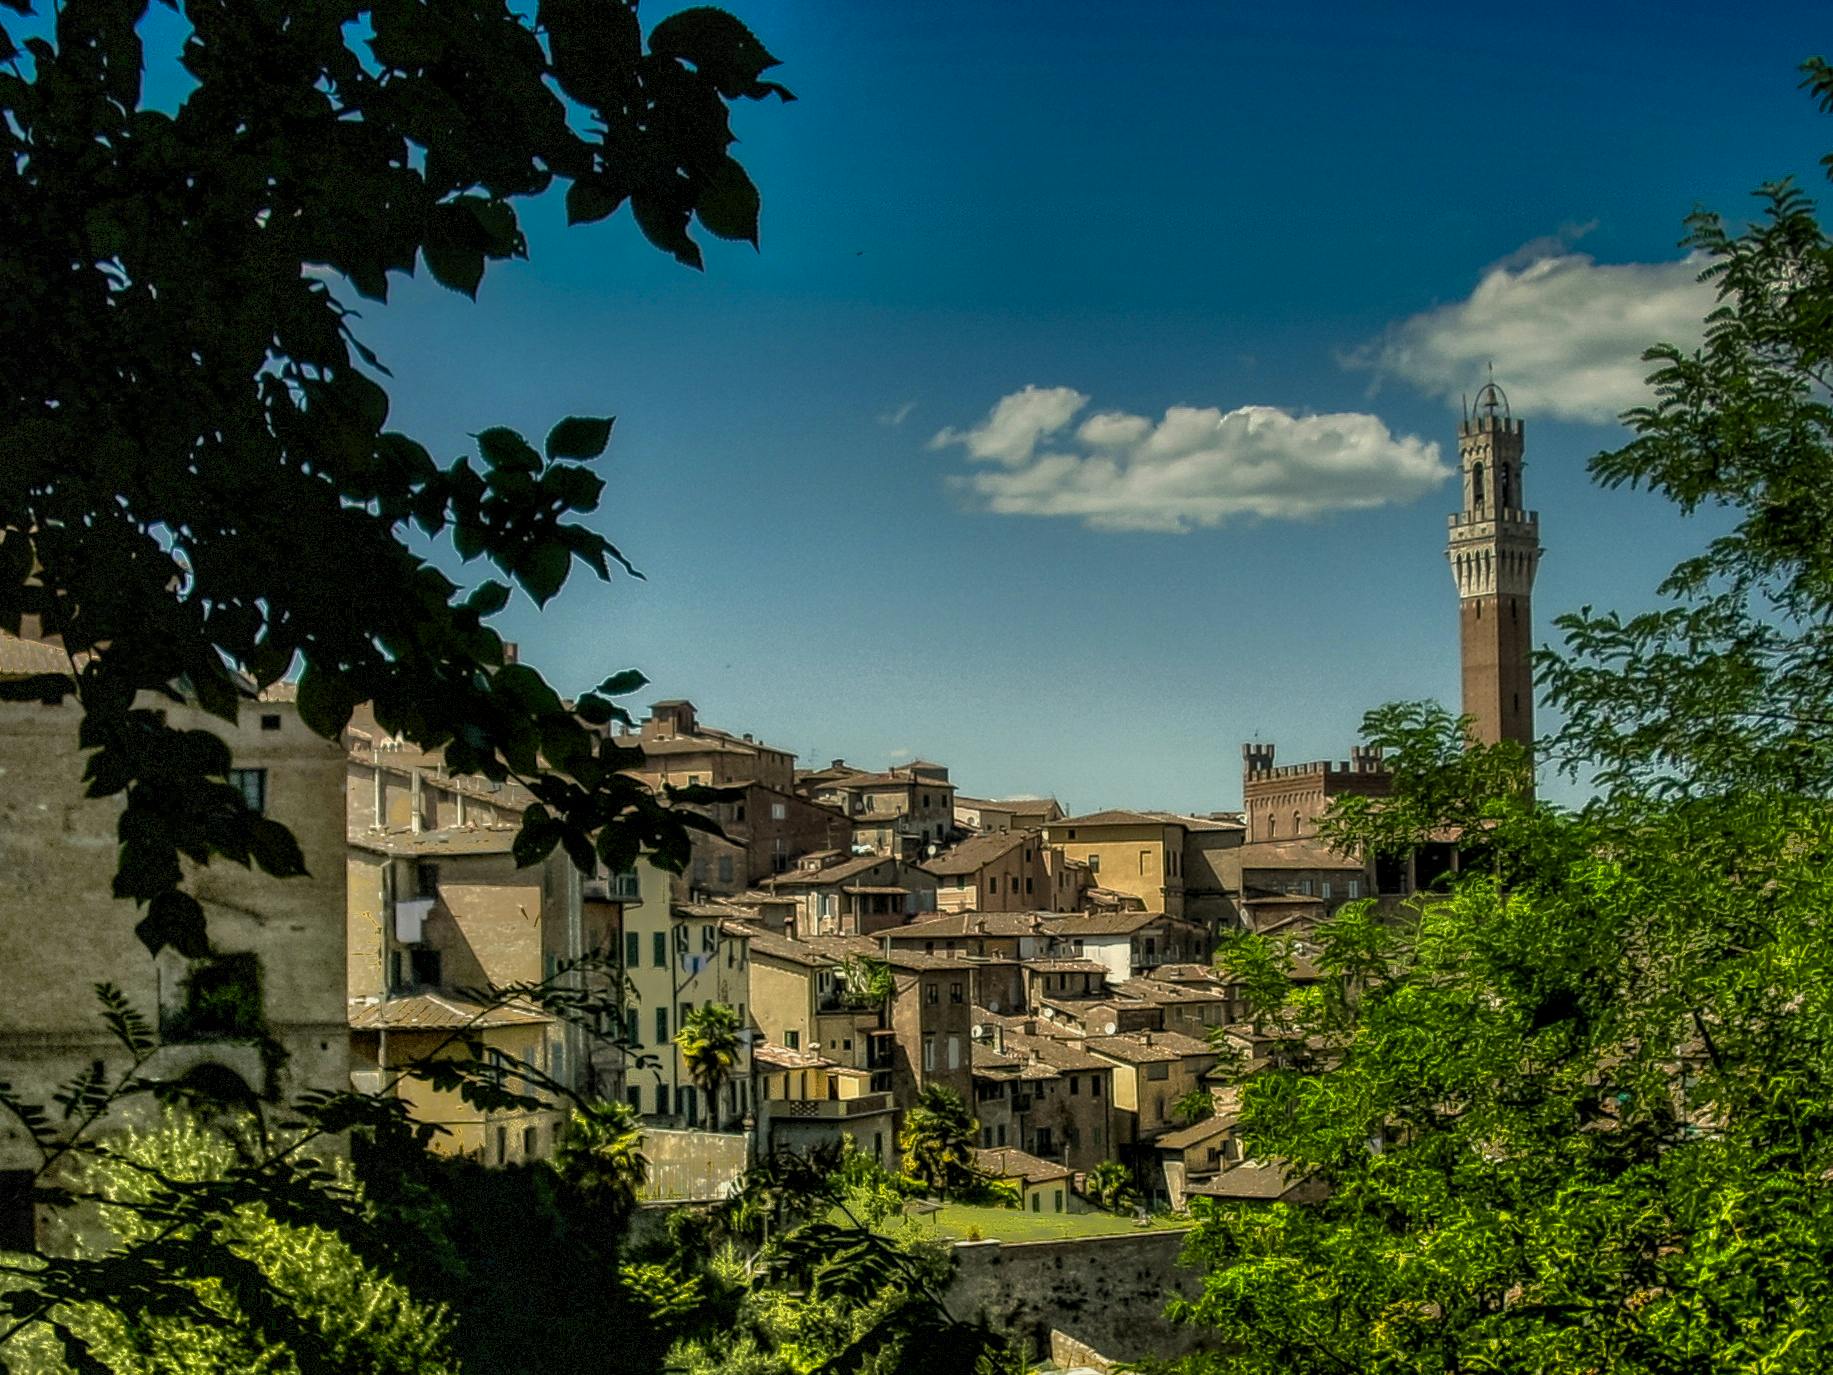 a view of a town with a clock tower in the distance, by Alessandro Galli Bibiena, pexels contest winner, renaissance, cypress trees, slide show, portrait image